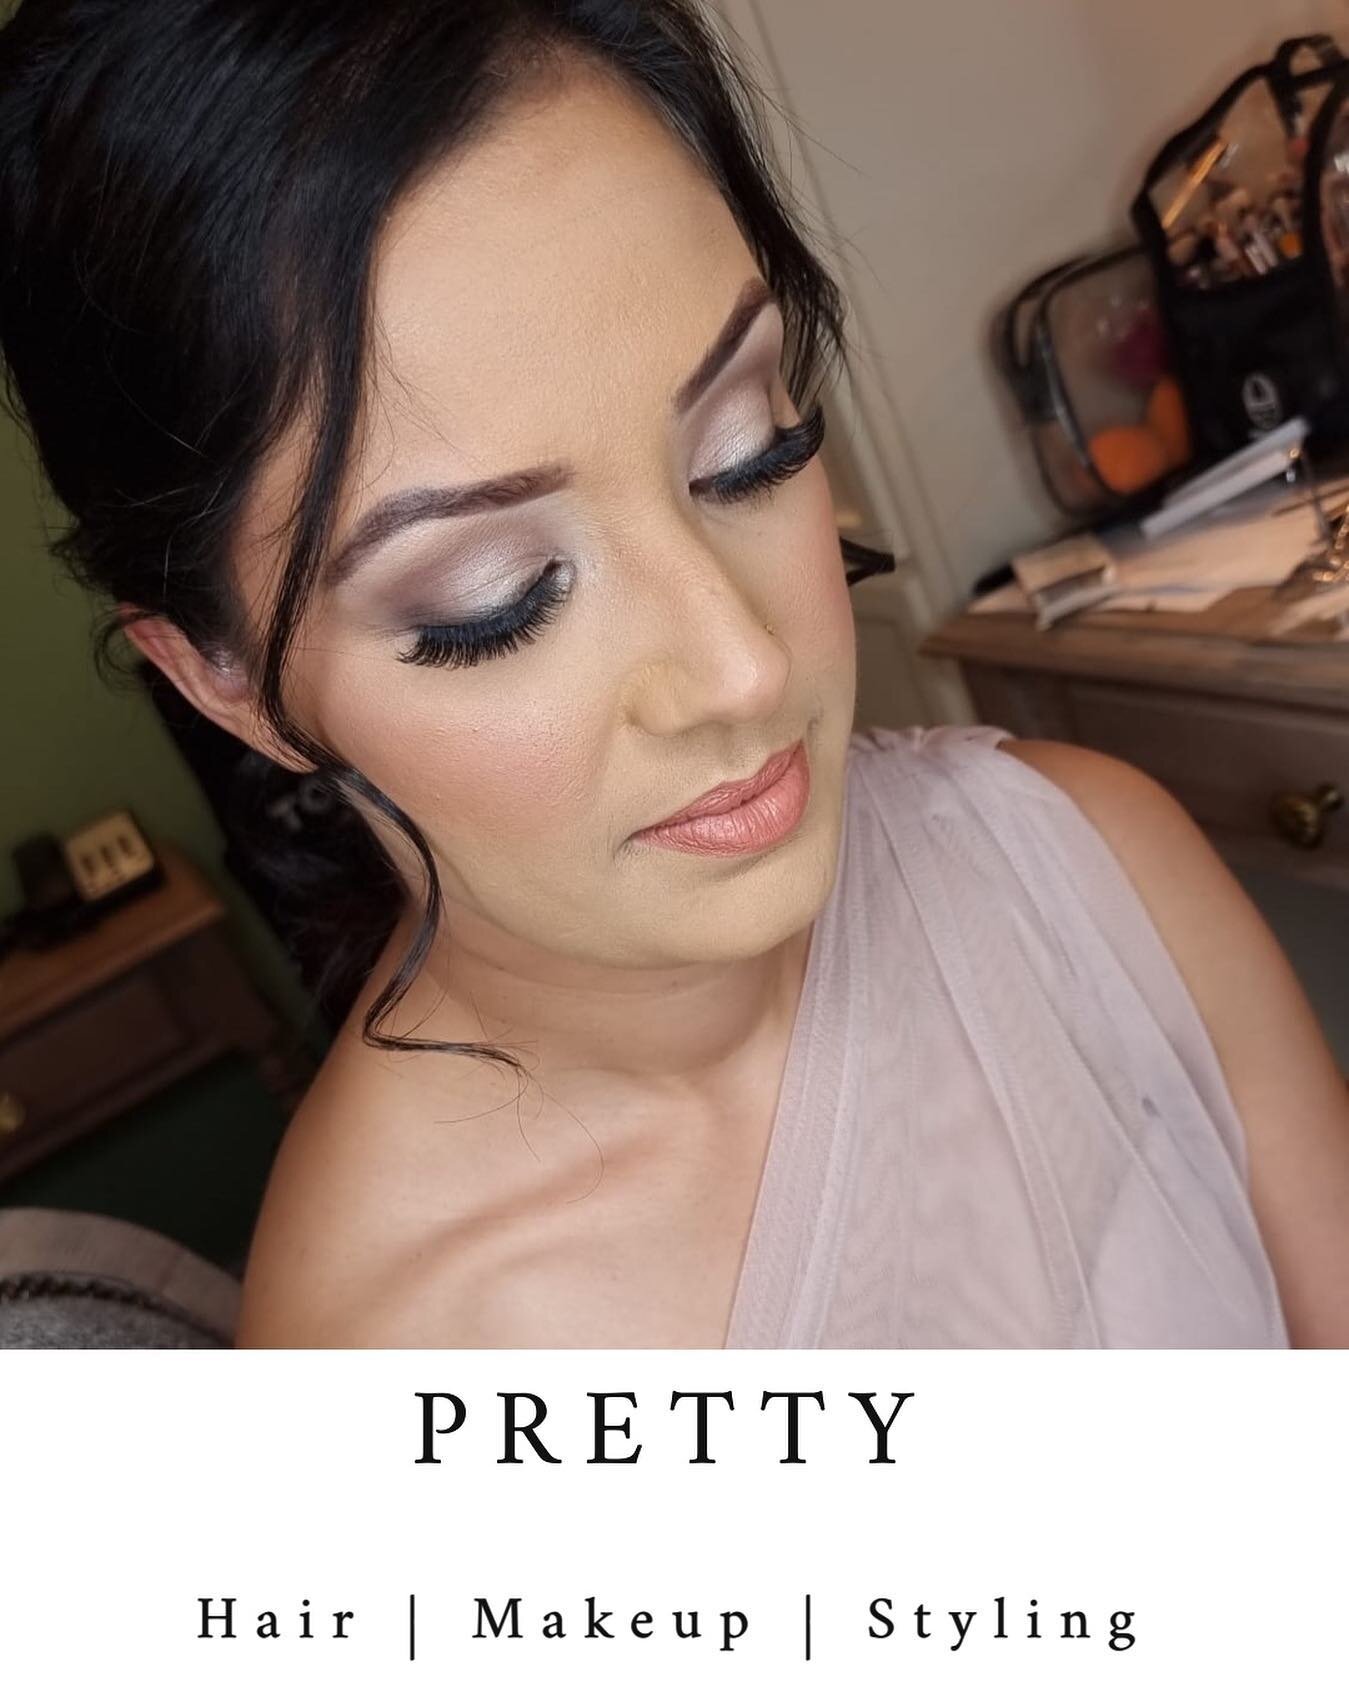 💄Senior Stylist: PRETTY 
📍Location: LEICESTER - available to travel ----------------------------------------------------------------------------------
To BOOK 👉🏽 Email us at promakeuplondonstylists@gmail.com --------------------------------------